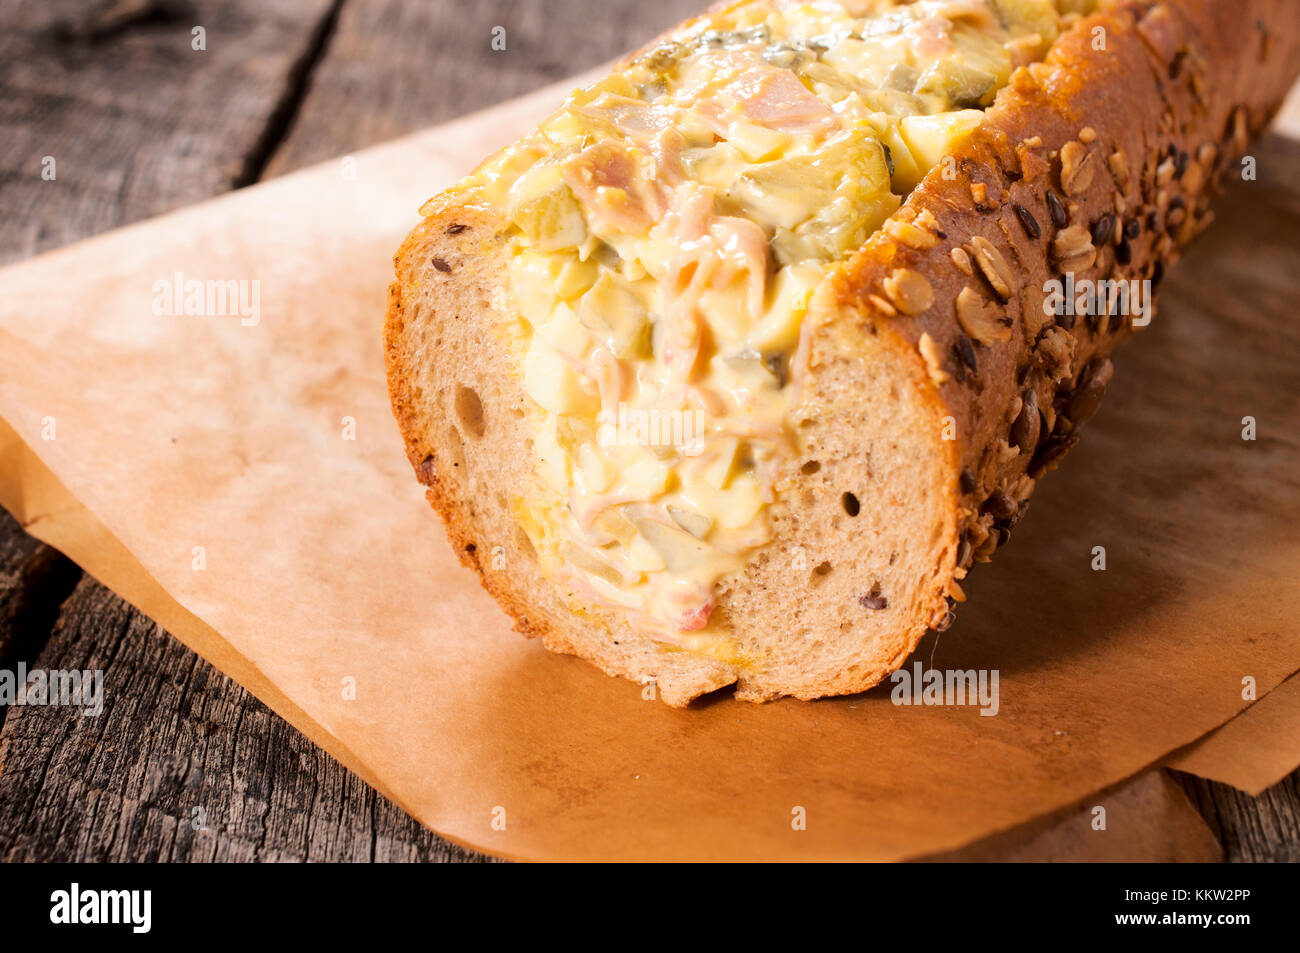 Single sub sandwich on the wooden table Stock Photo